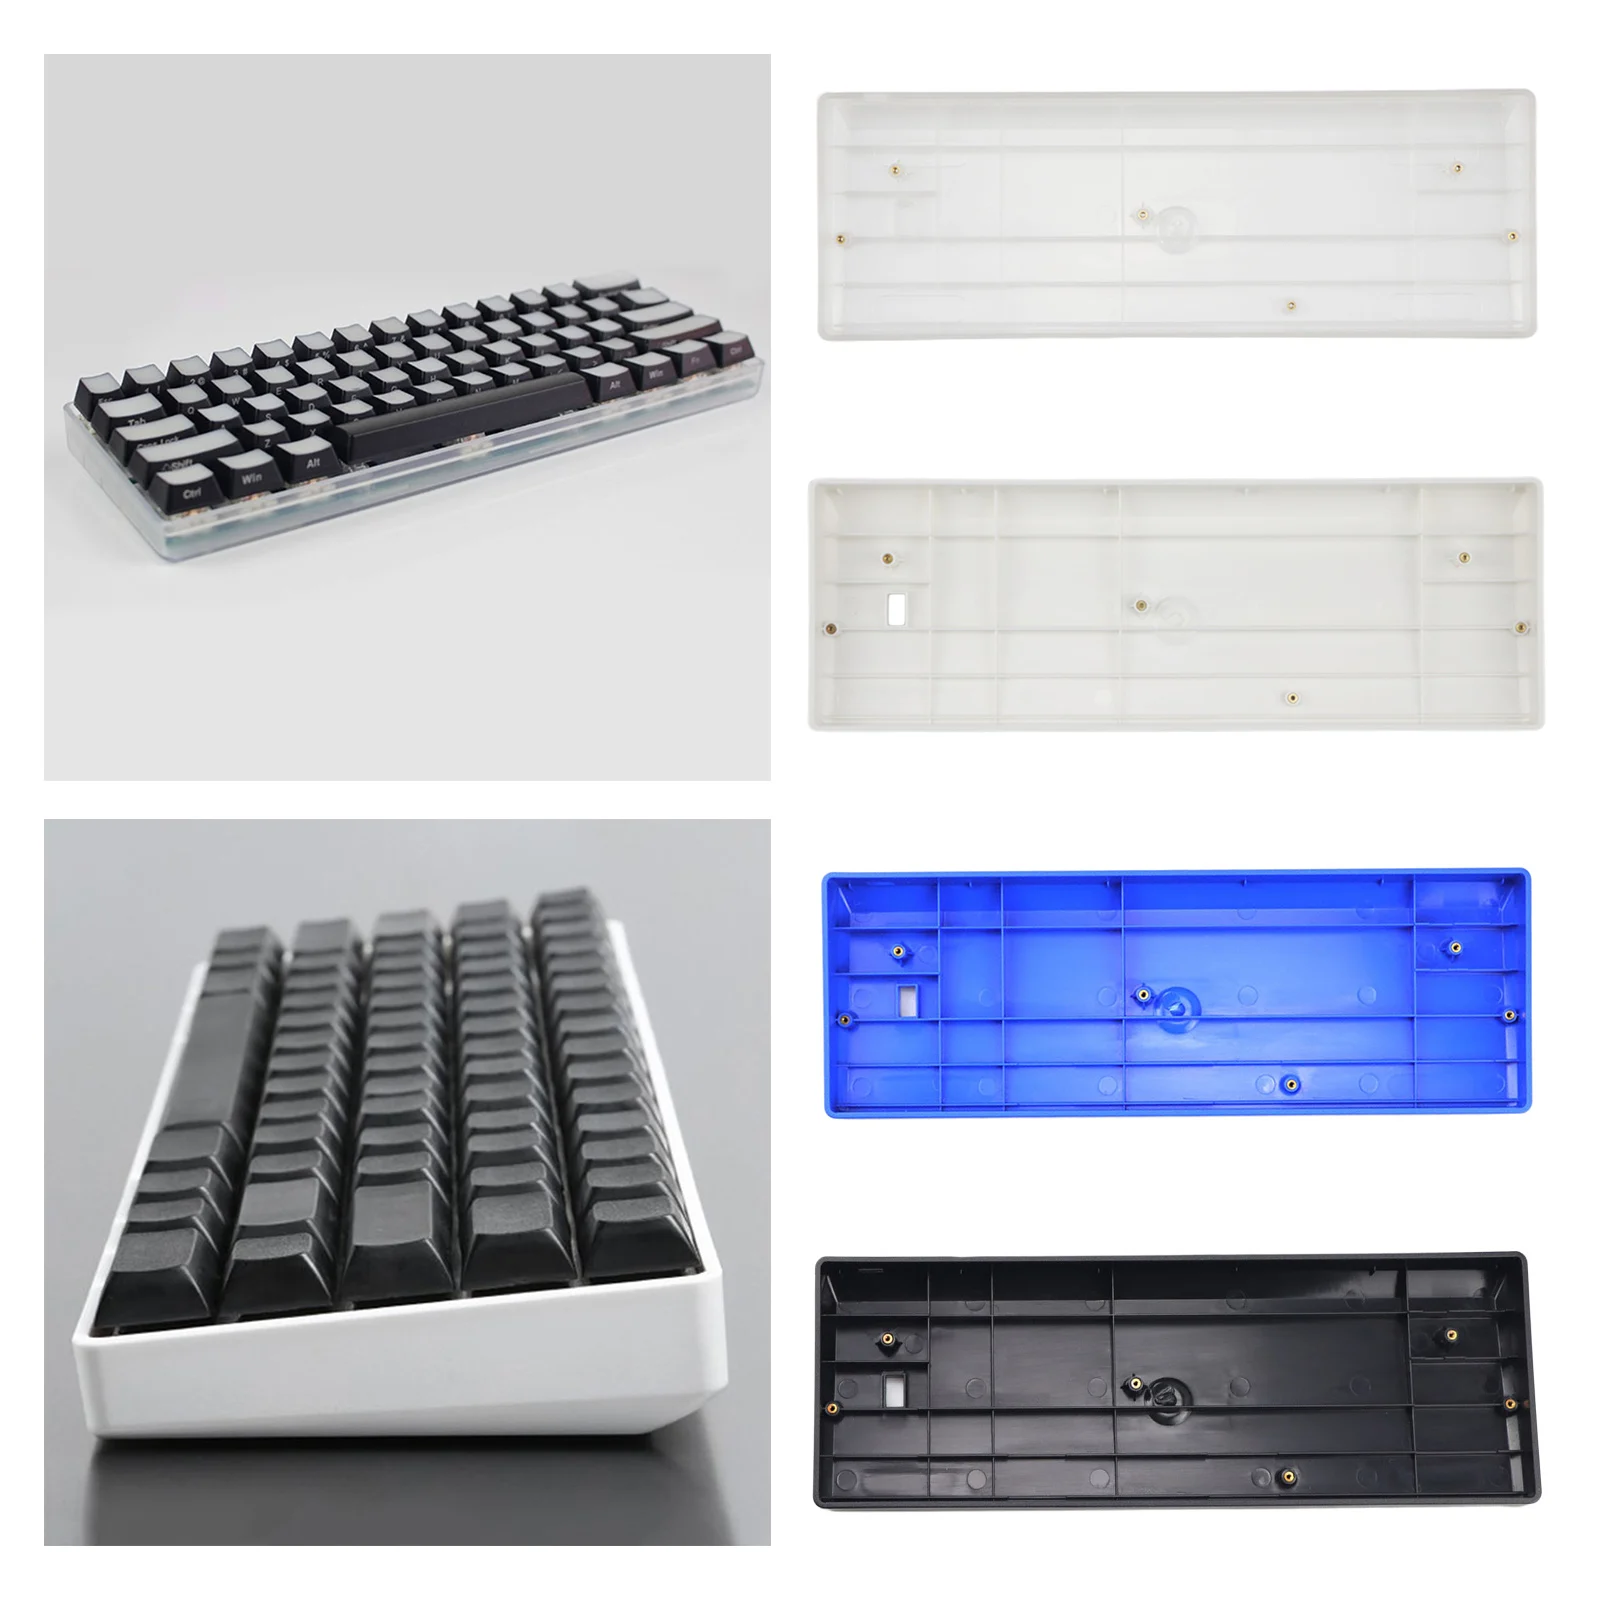 60% Mechanical Keyboard Shell Case Frame DIY Component Compatible with GH60 POKER2 FACEU 60 for Gaming and Productivity